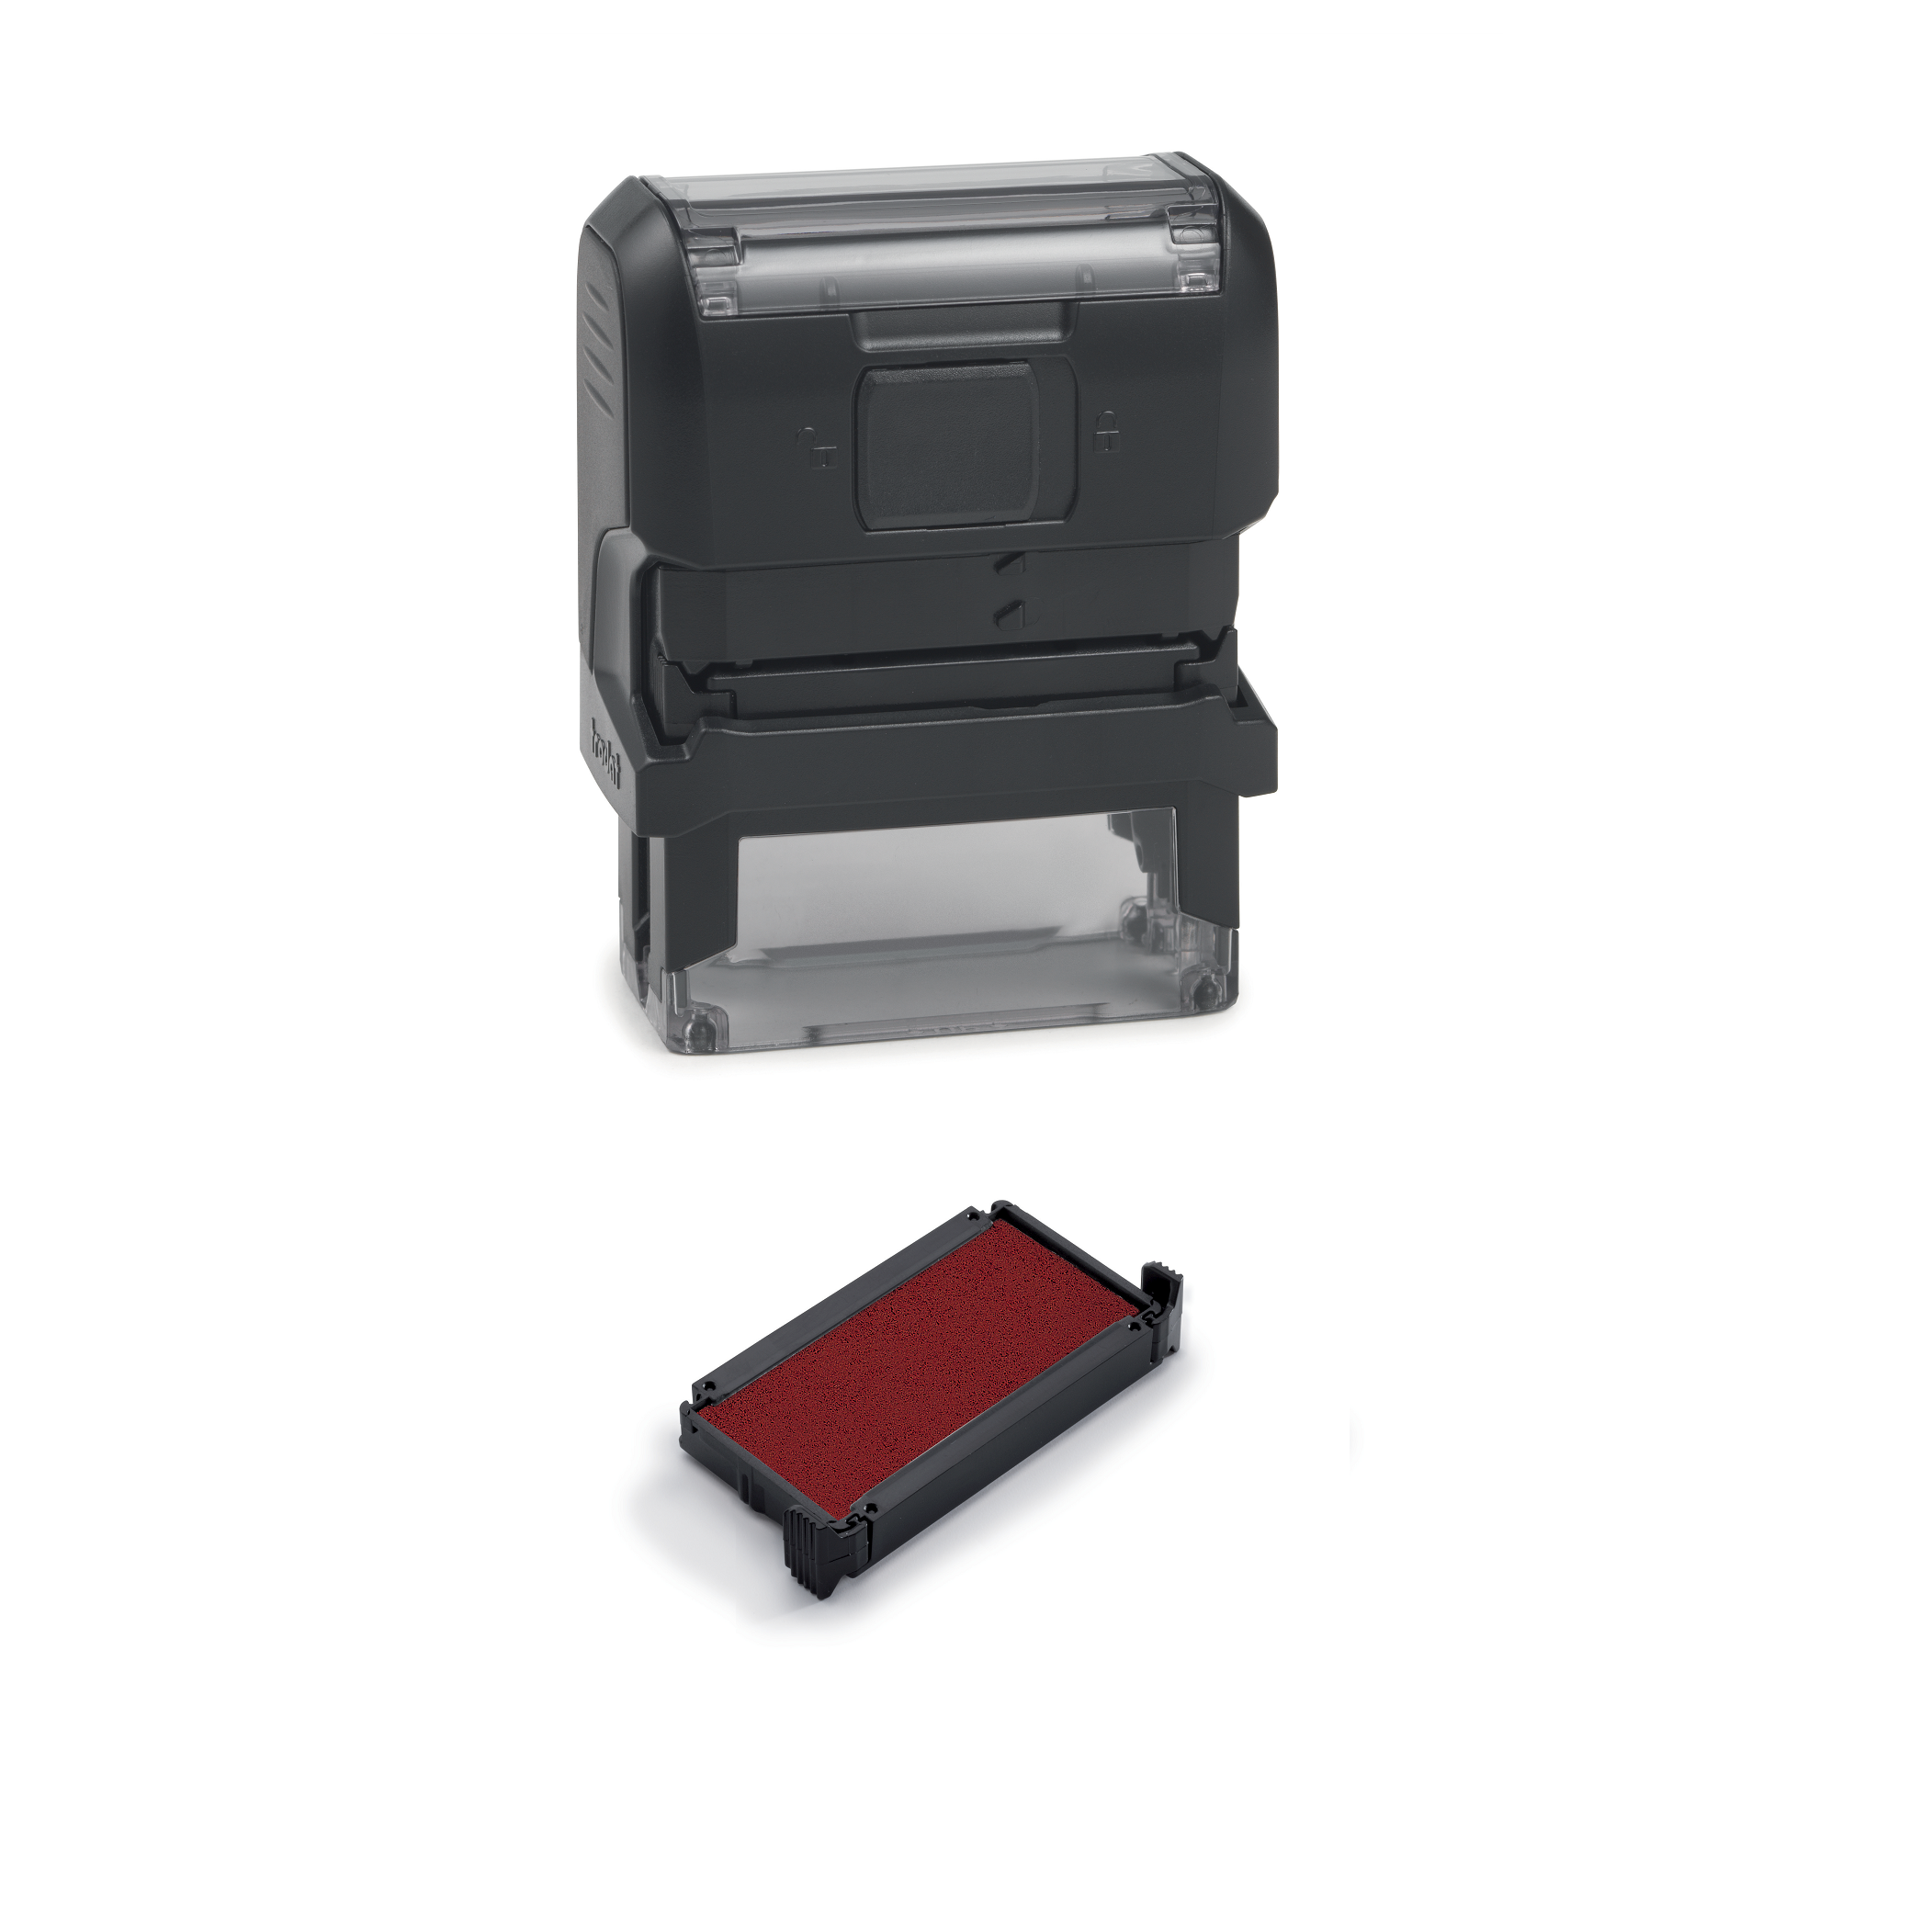 A/c Payee Only One Line Office Self Inking Rubber Stamp (SH-5092)